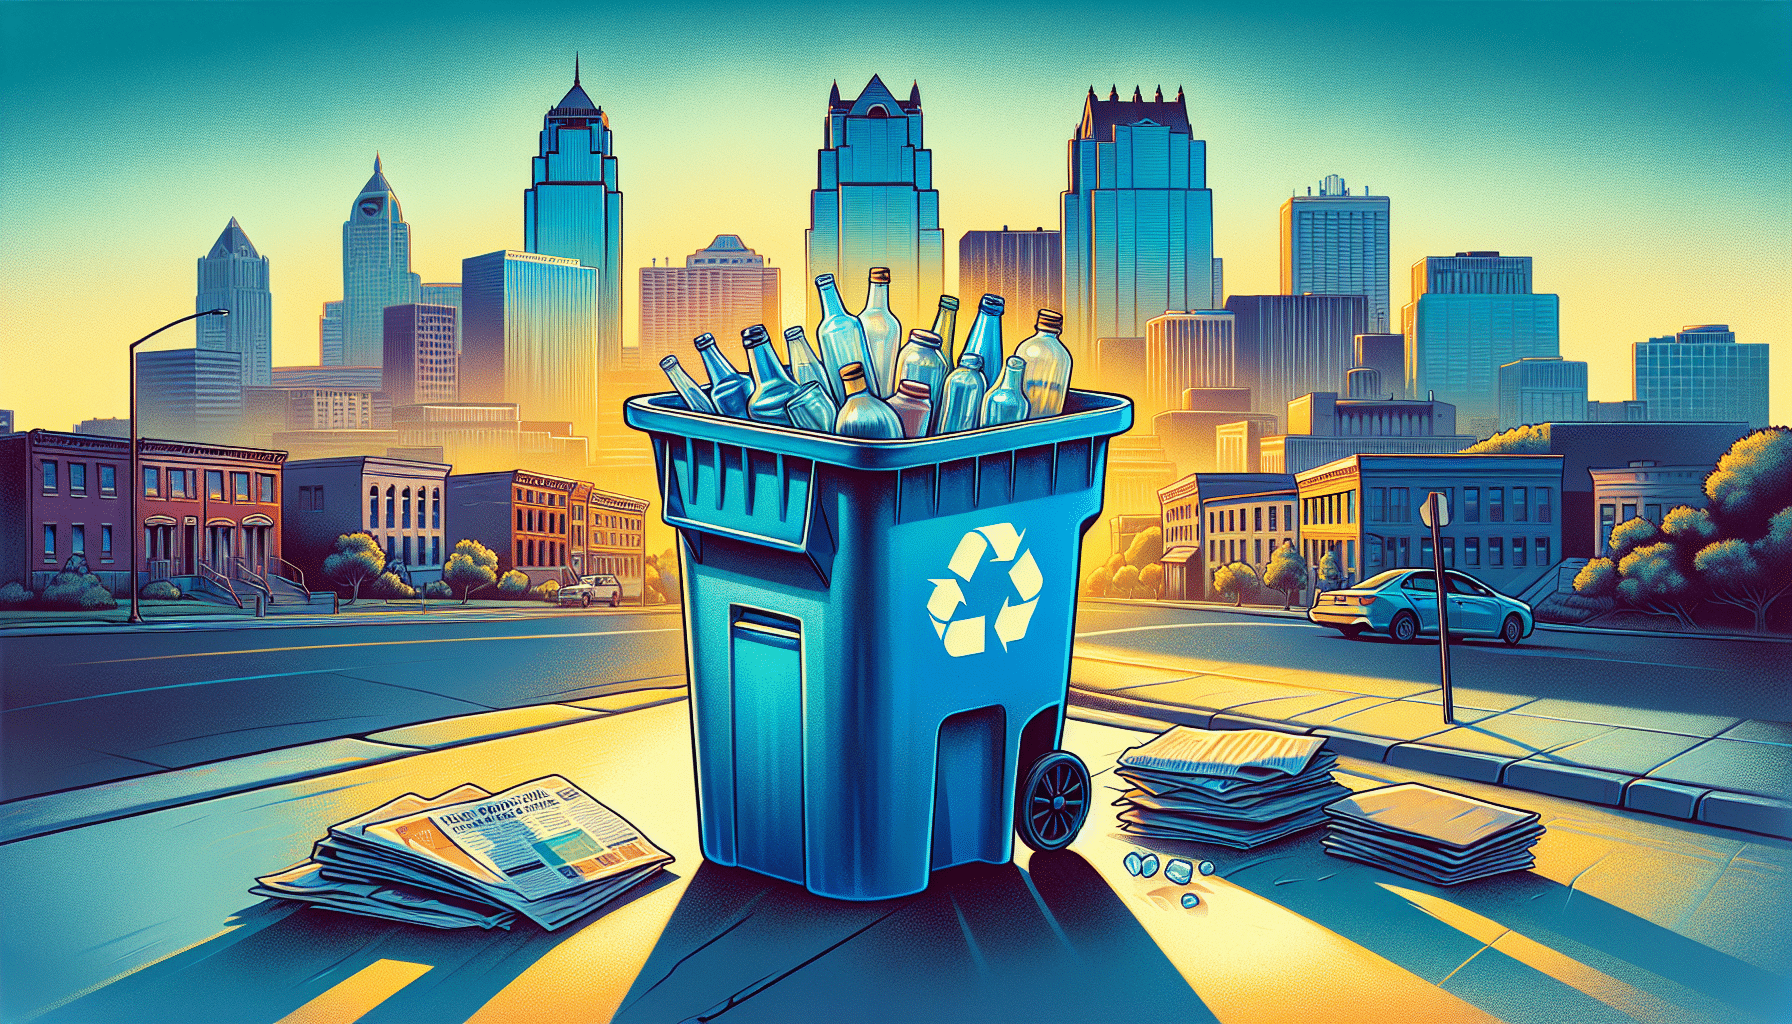 Illustration of a curbside recycling bin in Kansas City MO